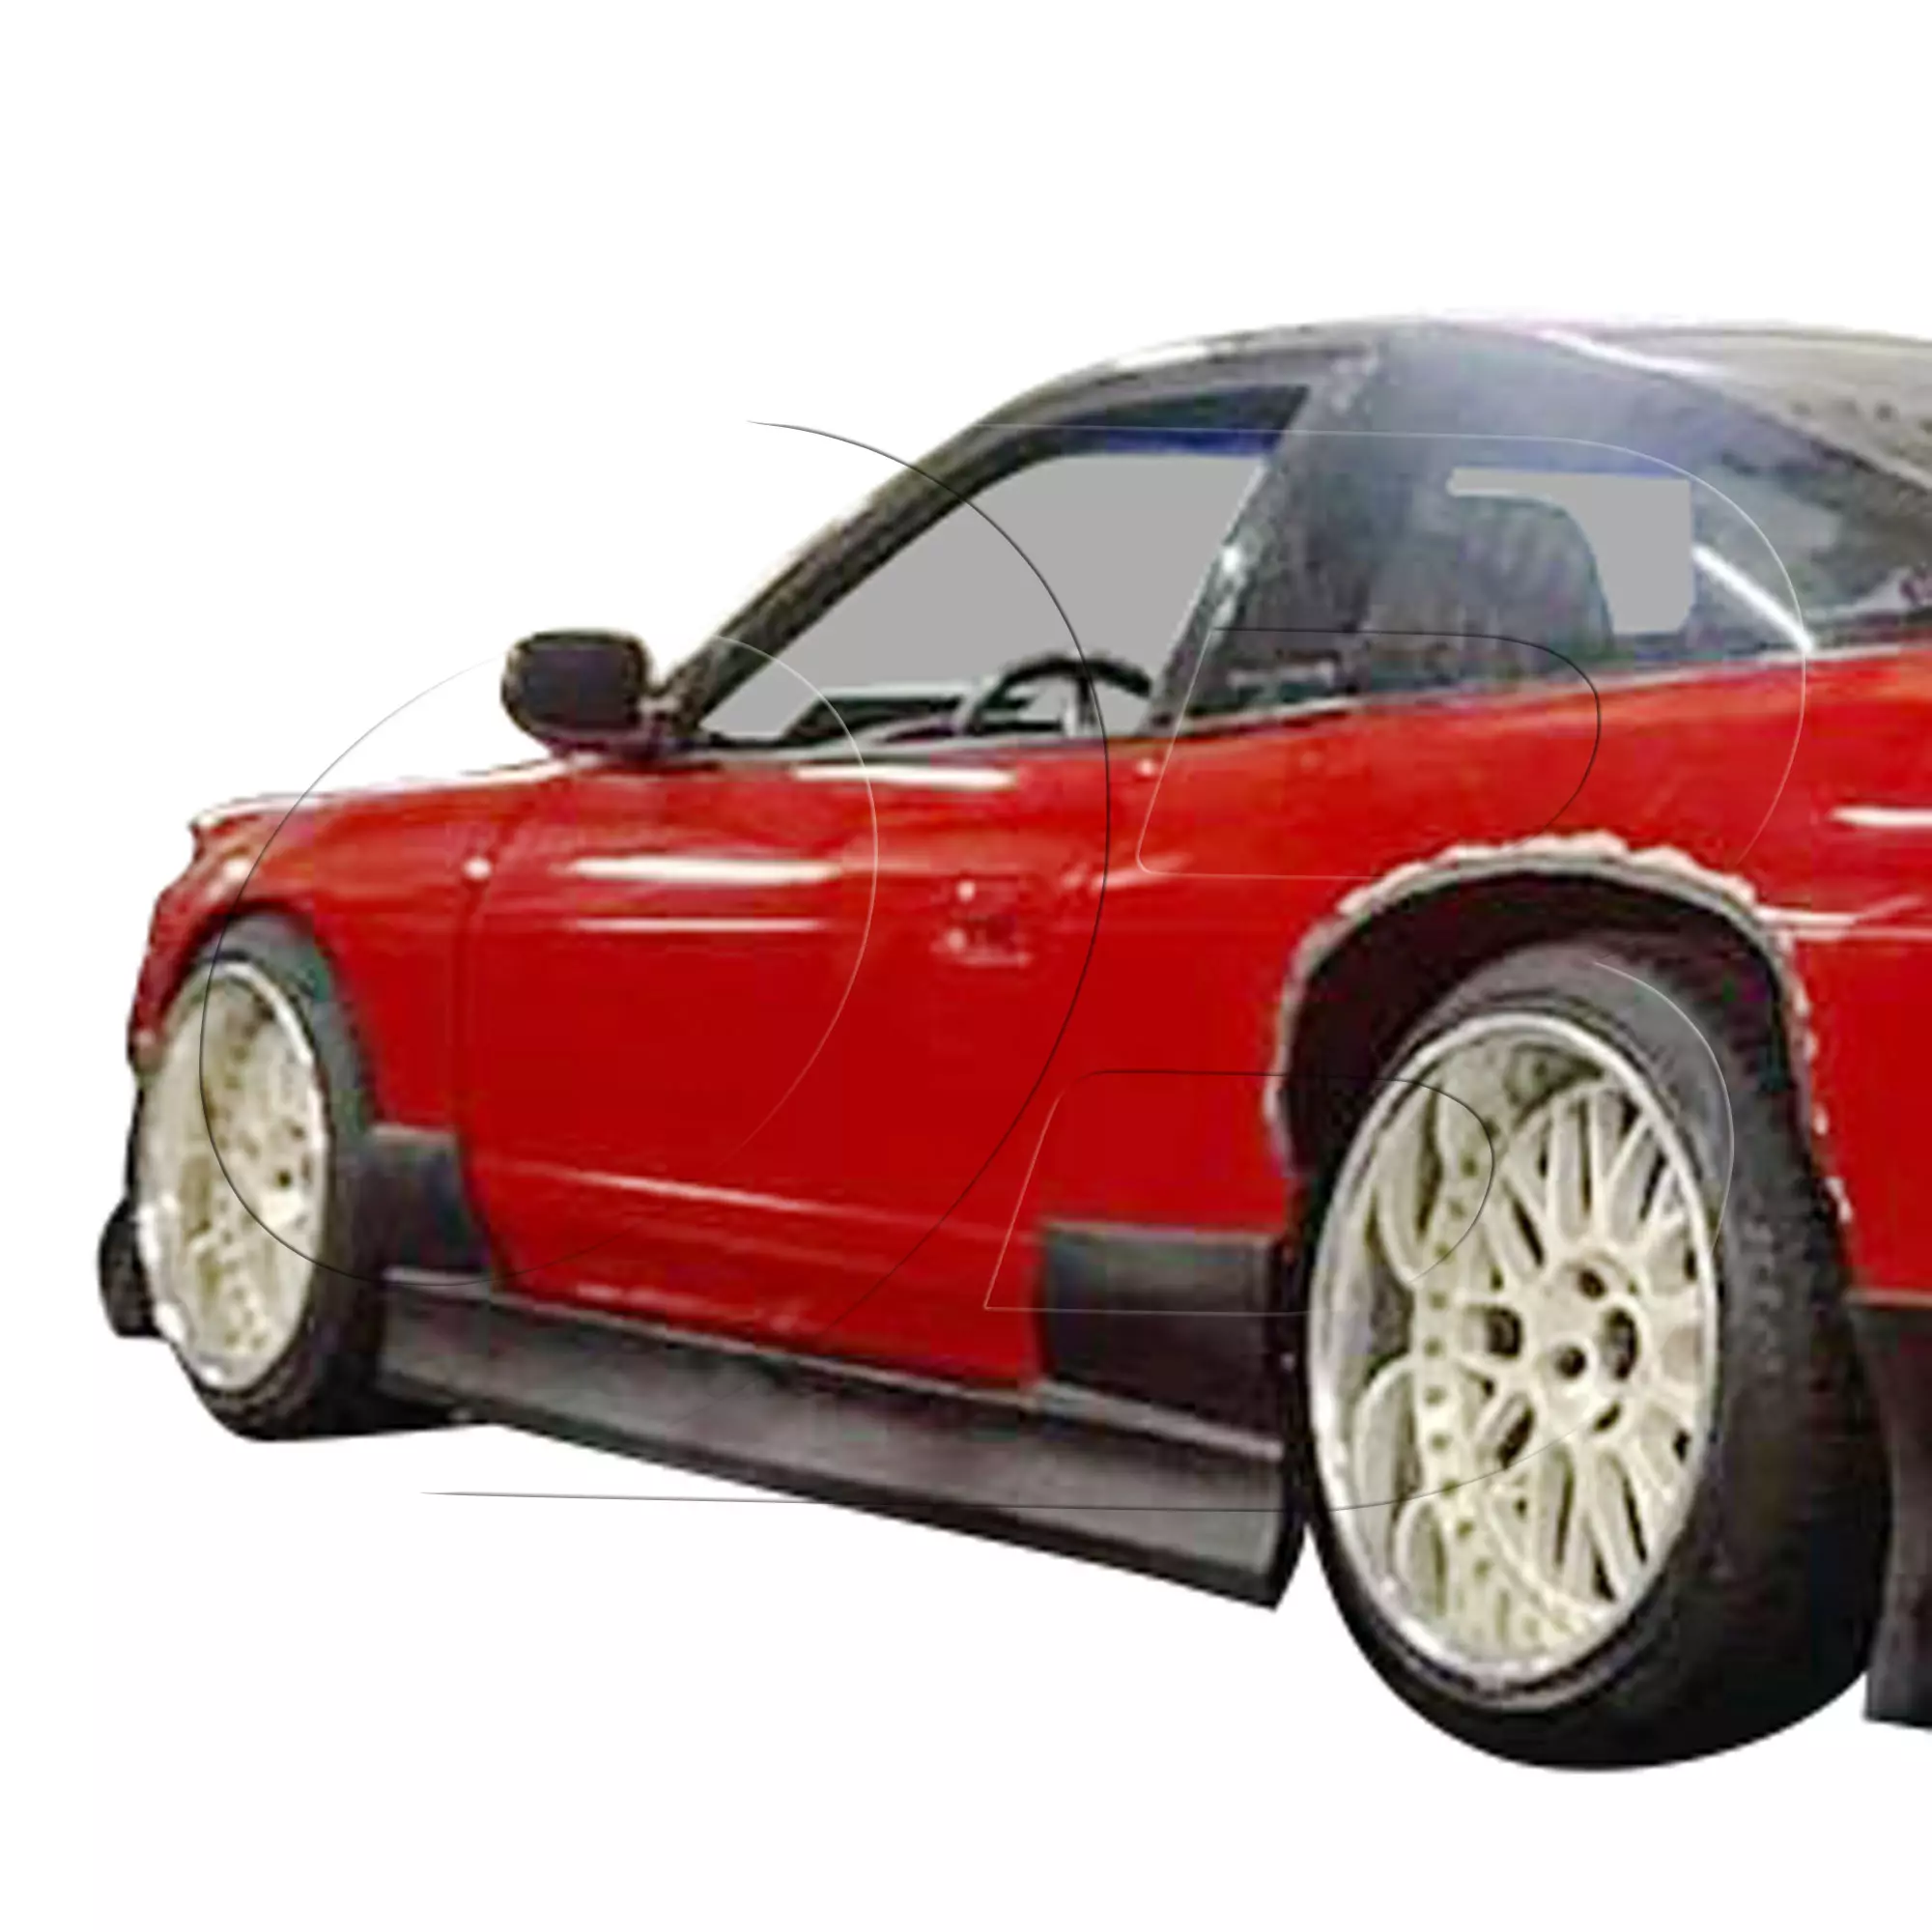 KBD Urethane Bsport2 Style 4pc Full Body Kit > Nissan 240SX 1989-1994 > 2dr Coupe - Image 52